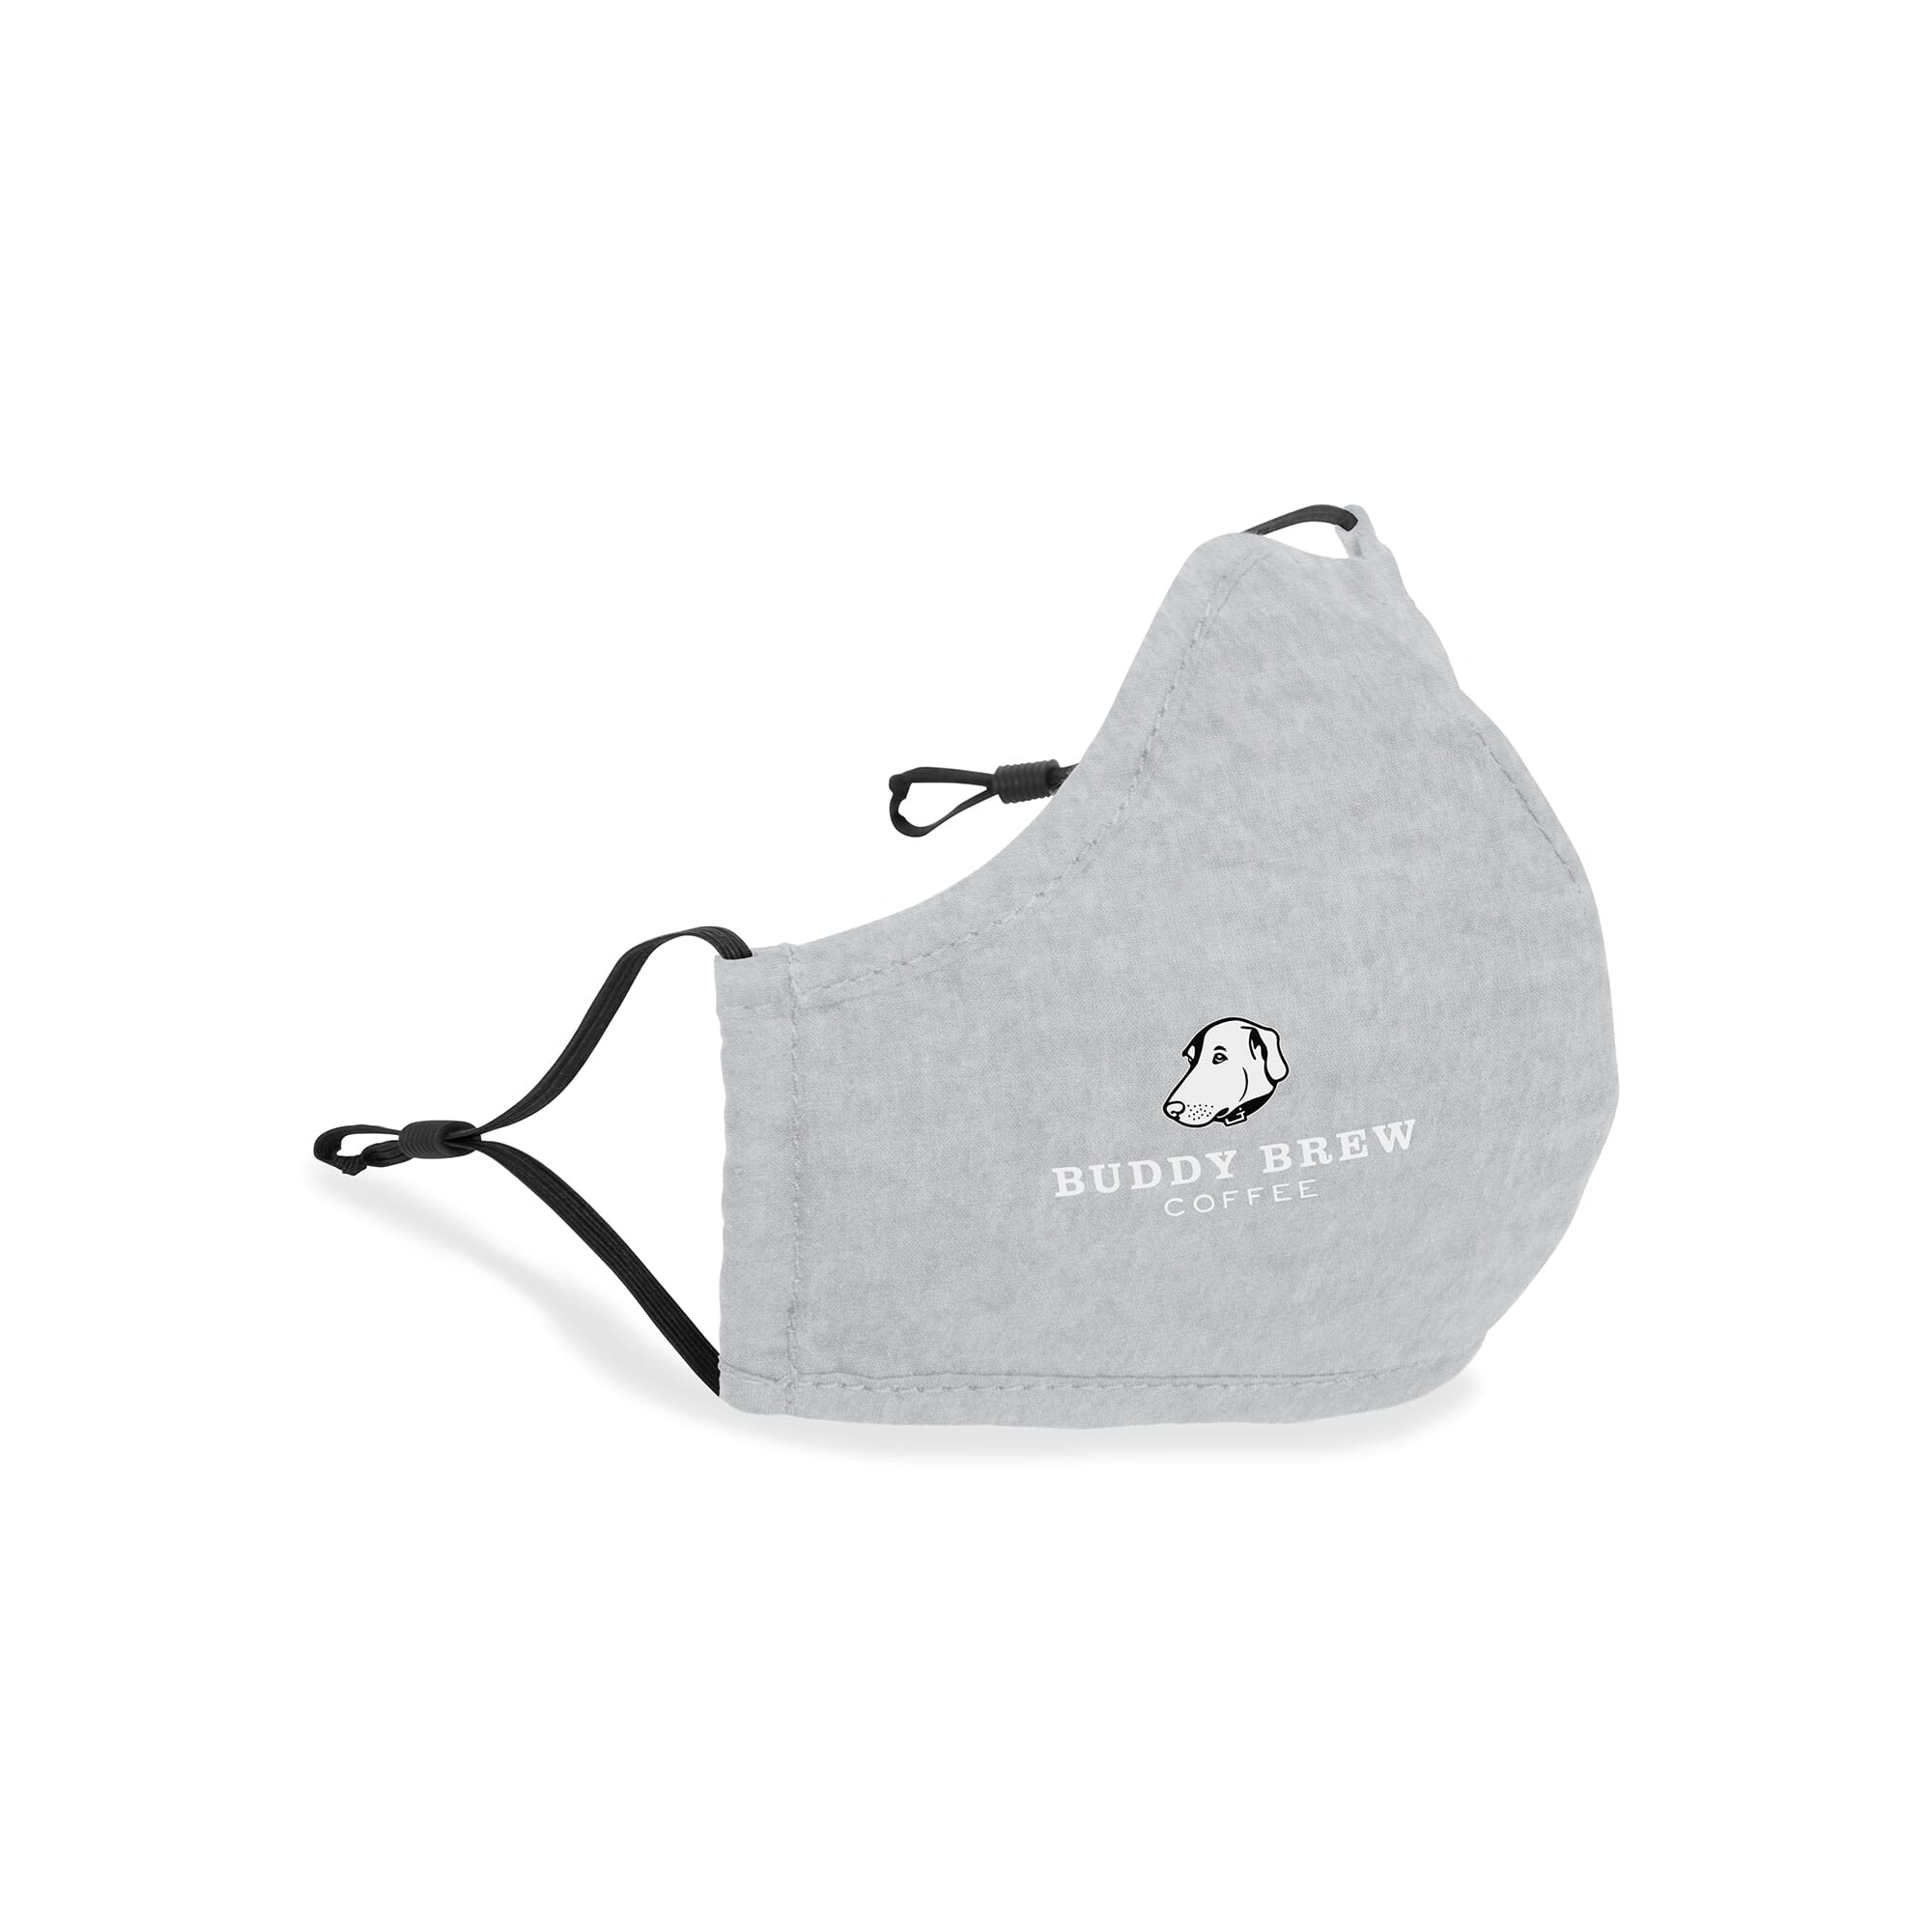 Light heather gray face mask with adjustable ear straps